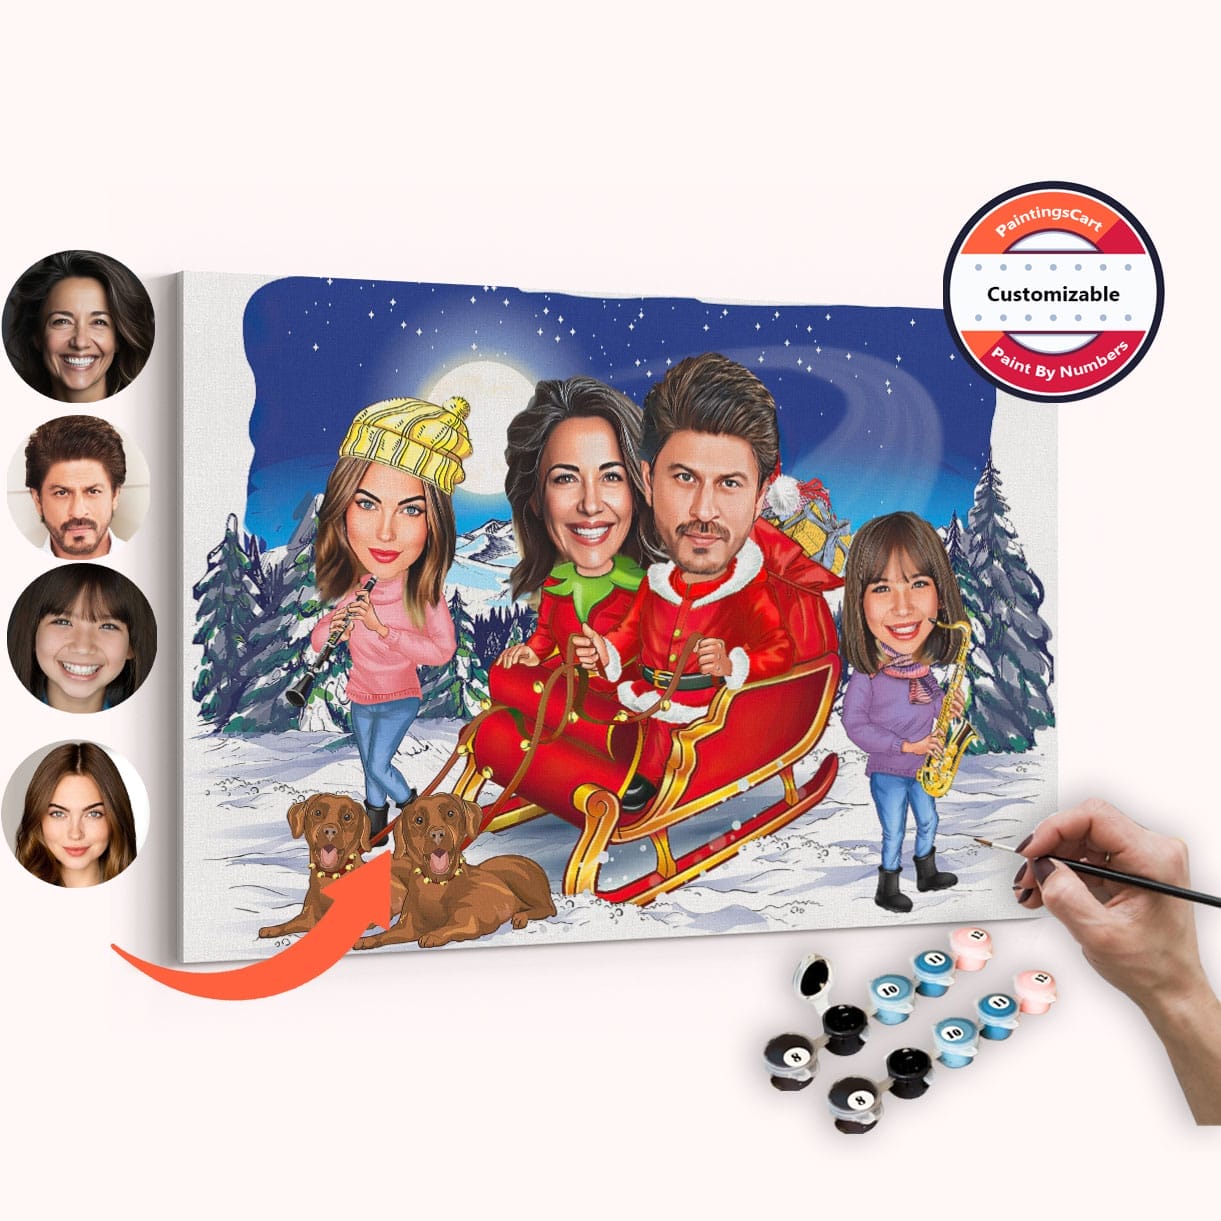 Enjoy with the family - Custom Caricature DIY Painting